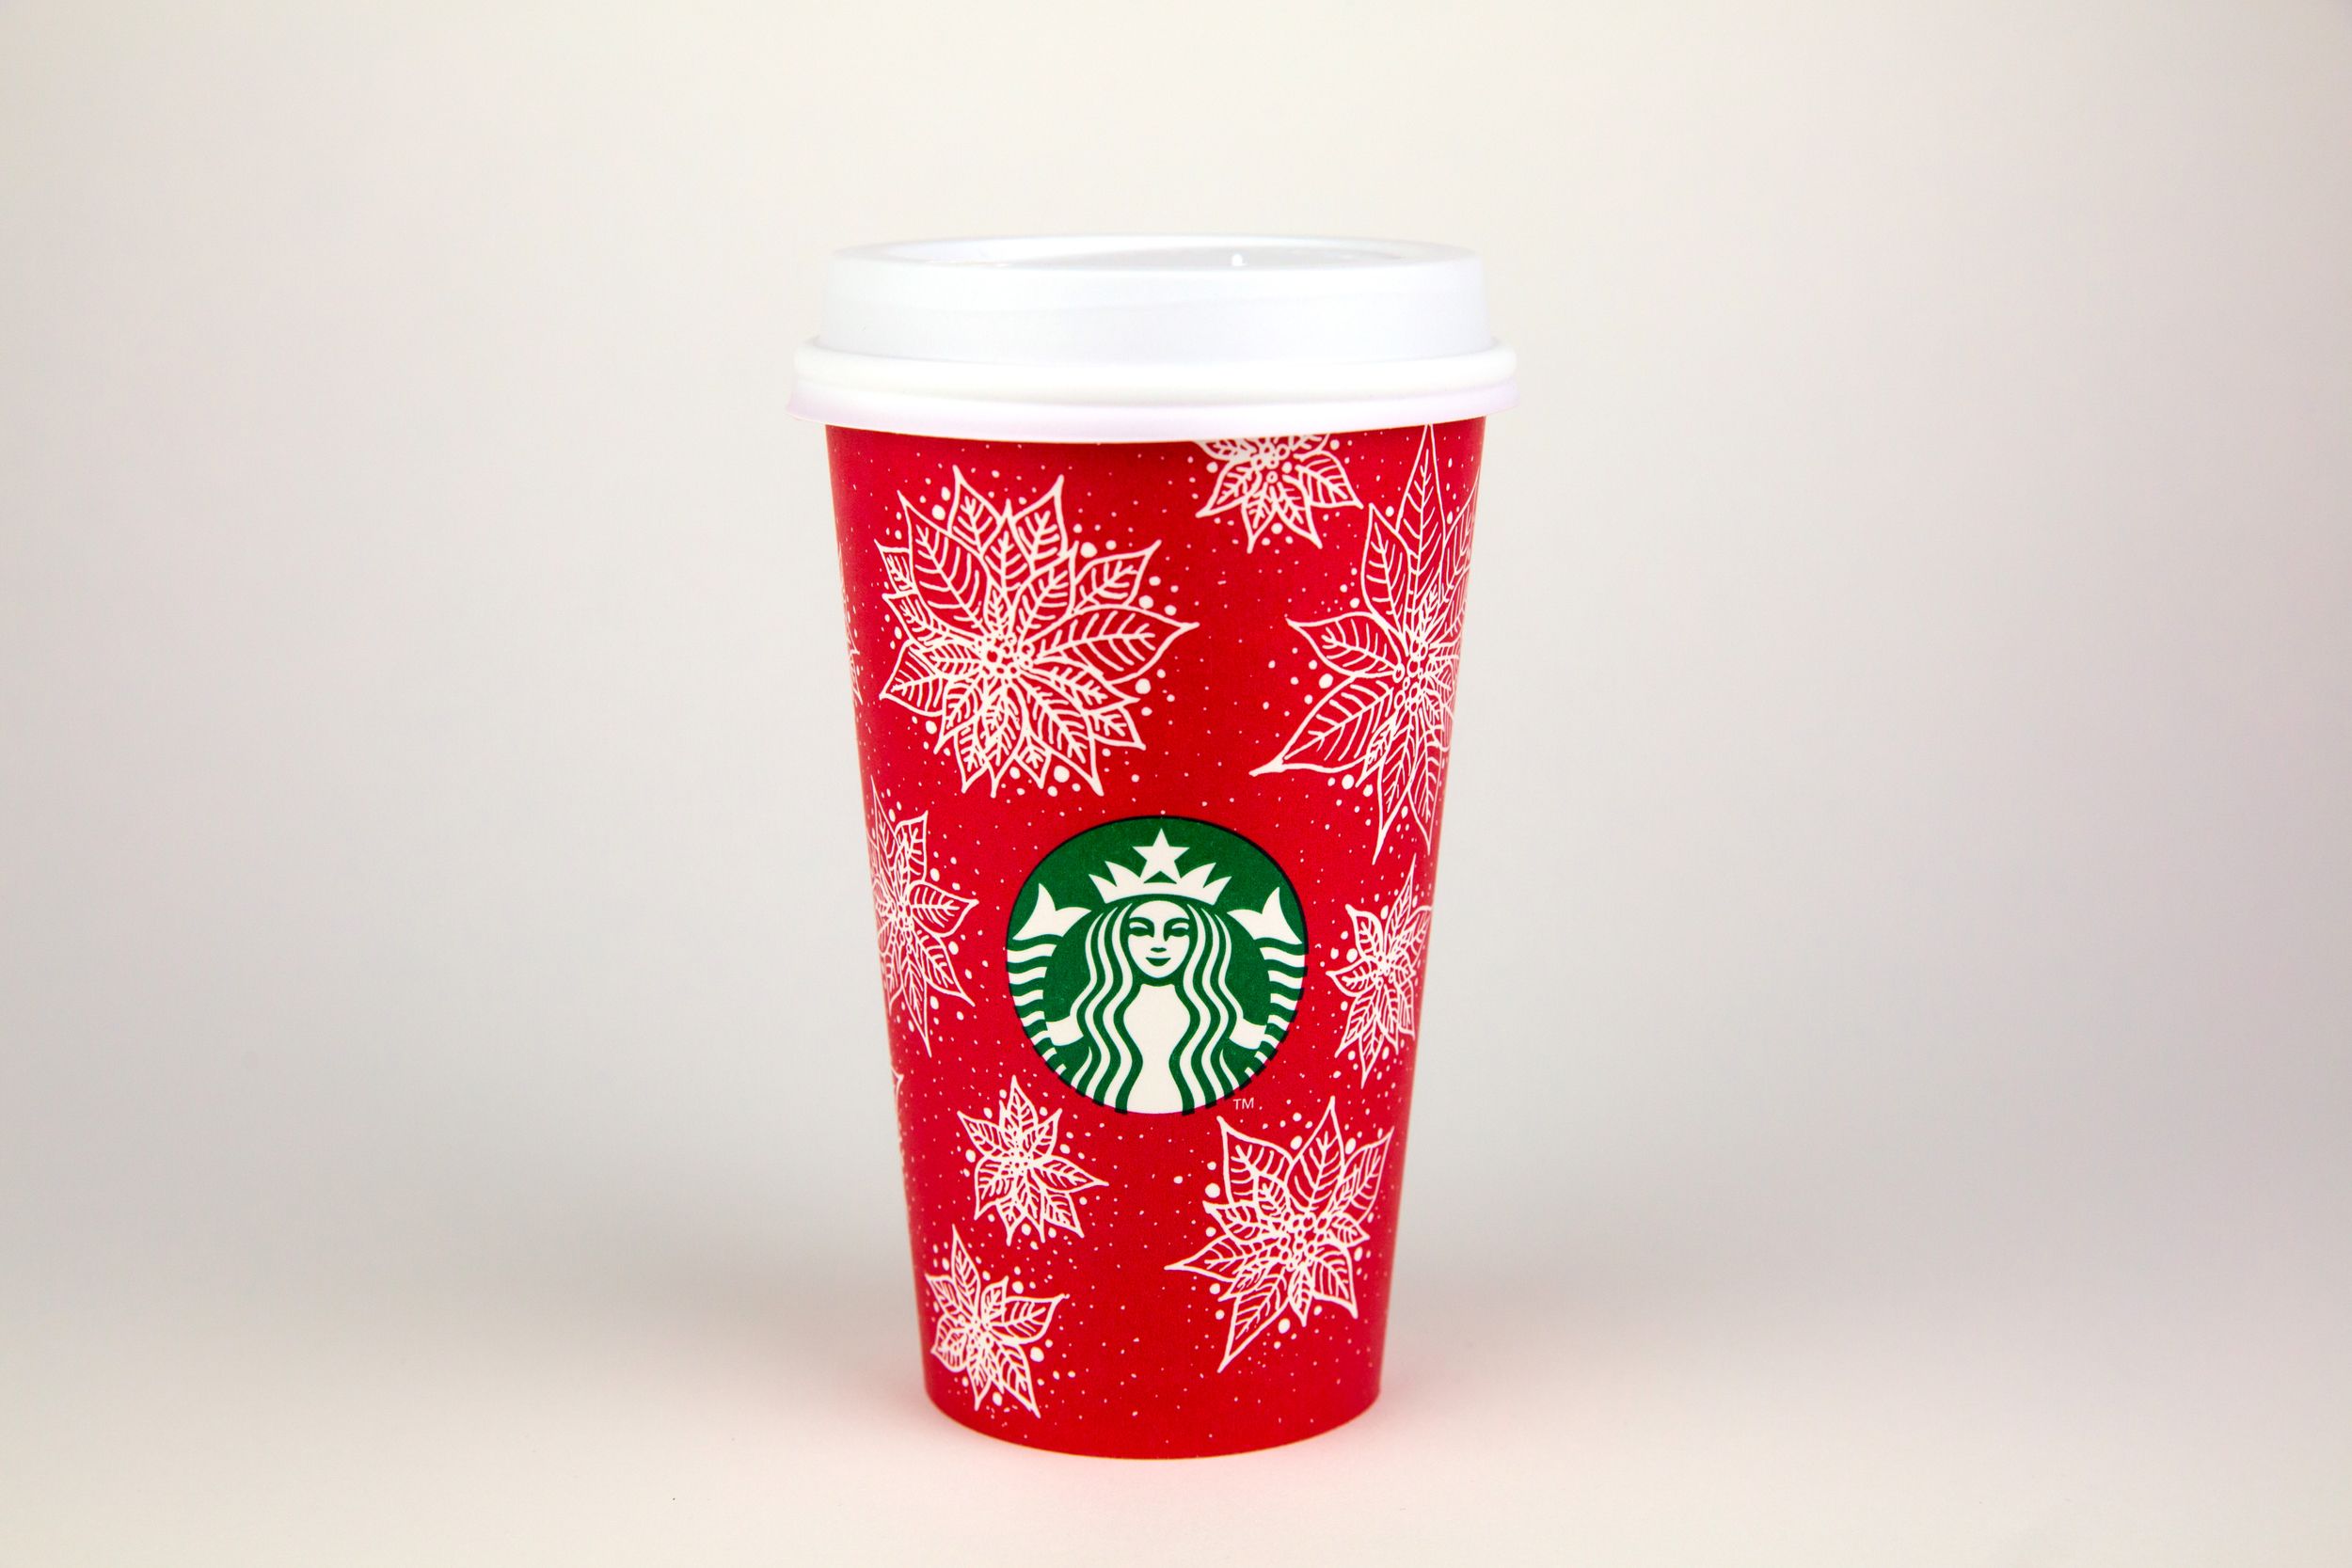 New Starbucks Winter Red Cups - Every Cup Design